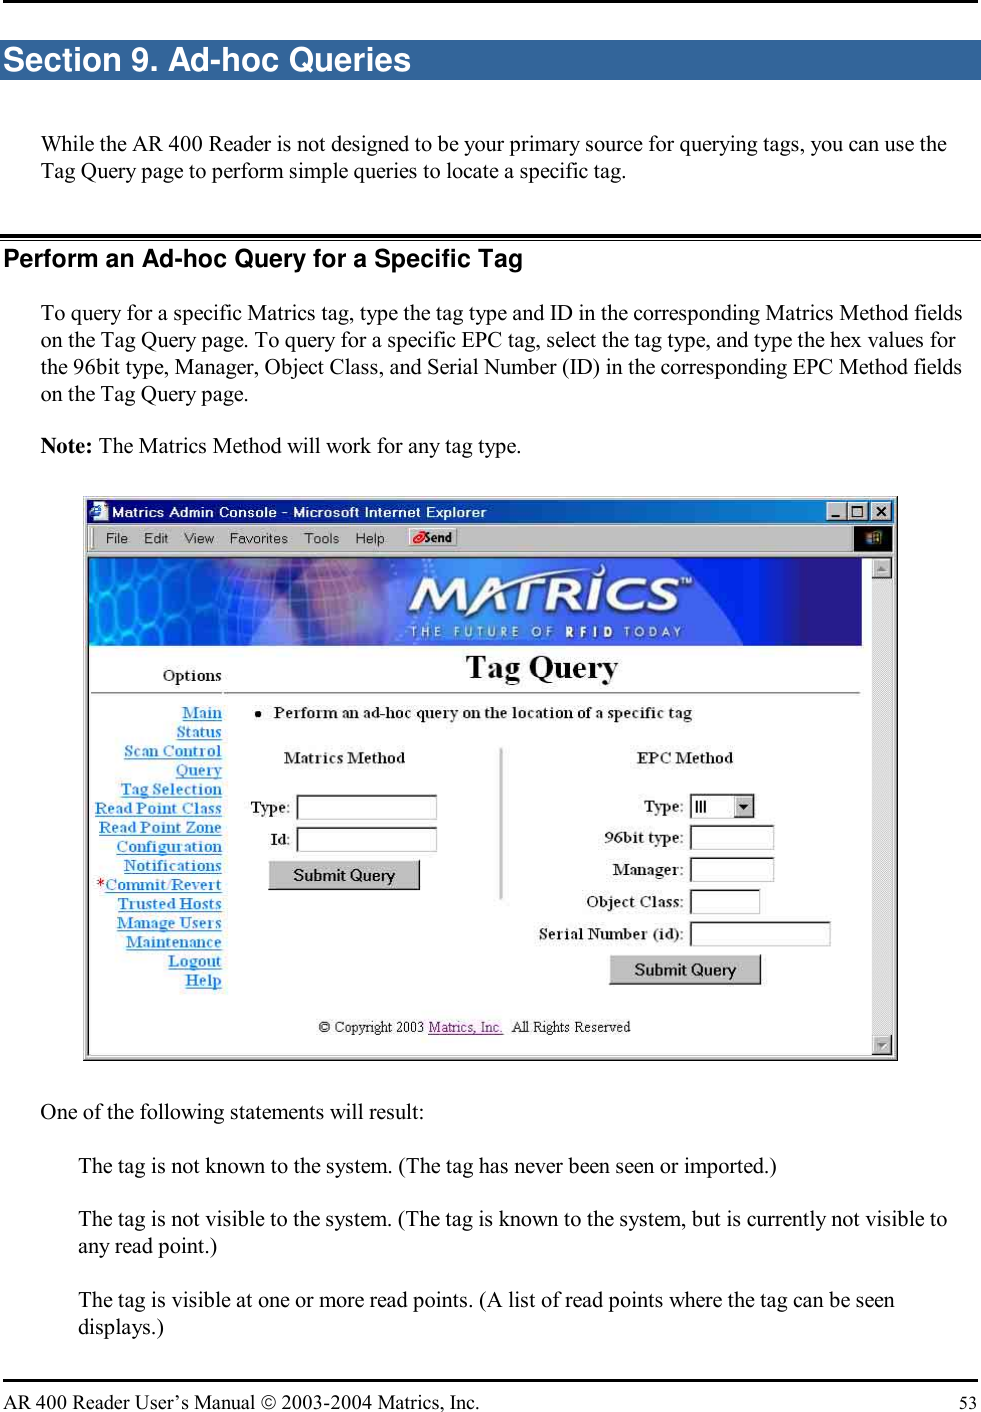   AR 400 Reader User’s Manual  2003-2004 Matrics, Inc.  53 Section 9. Ad-hoc Queries While the AR 400 Reader is not designed to be your primary source for querying tags, you can use the Tag Query page to perform simple queries to locate a specific tag. Perform an Ad-hoc Query for a Specific Tag To query for a specific Matrics tag, type the tag type and ID in the corresponding Matrics Method fields on the Tag Query page. To query for a specific EPC tag, select the tag type, and type the hex values for the 96bit type, Manager, Object Class, and Serial Number (ID) in the corresponding EPC Method fields on the Tag Query page. Note: The Matrics Method will work for any tag type.  One of the following statements will result:   The tag is not known to the system. (The tag has never been seen or imported.)   The tag is not visible to the system. (The tag is known to the system, but is currently not visible to any read point.)   The tag is visible at one or more read points. (A list of read points where the tag can be seen displays.) 